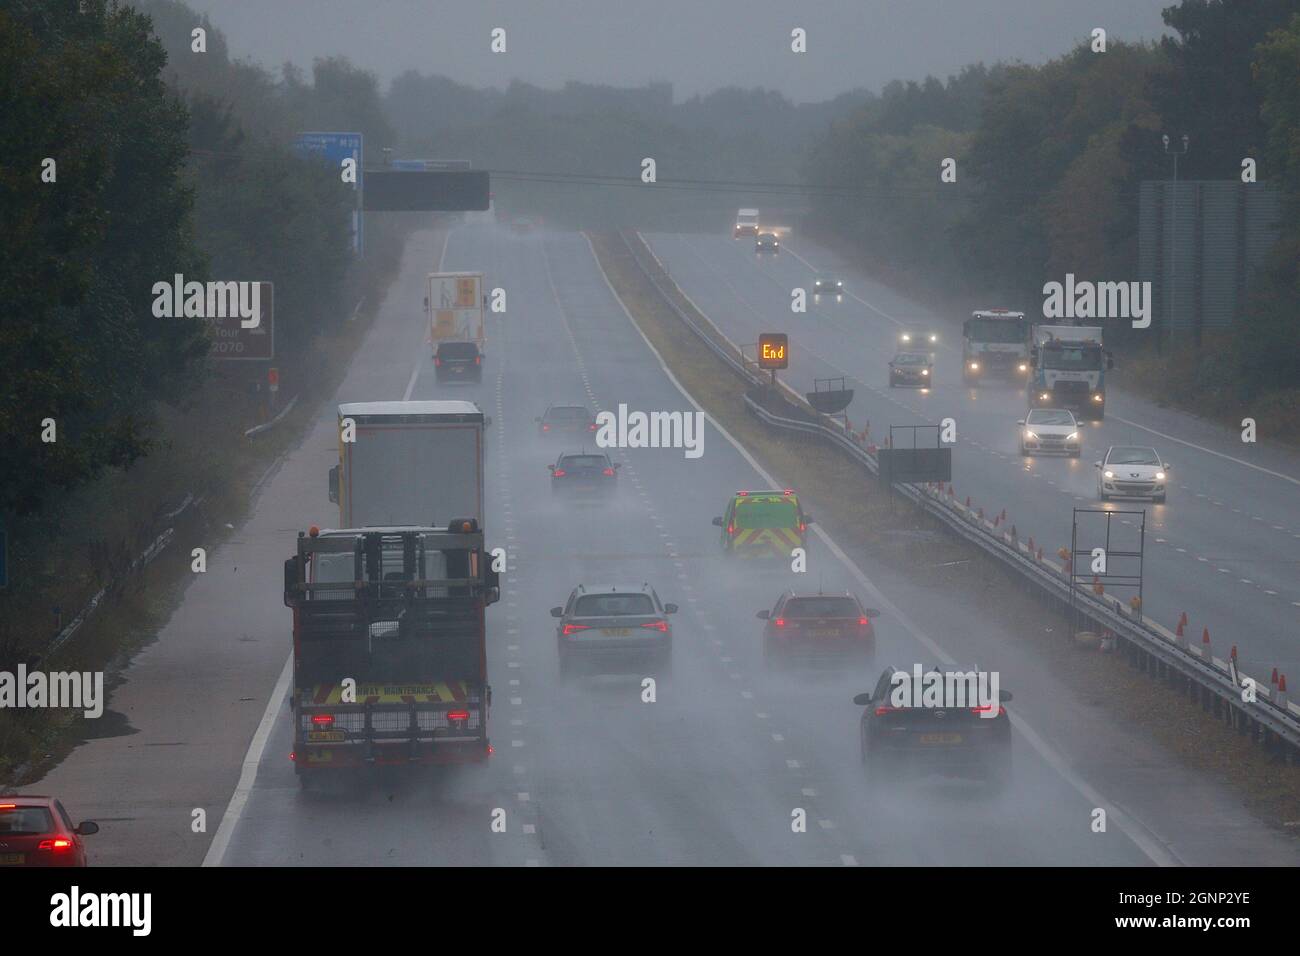 Ashford, Kent, UK. 27 Sep, 2021. UK Weather: A band of heavy rain sweeps across the country with windy weather seen here on the M20 motorway heading South towards Dover. Photo Credit: Paul Lawrenson /Alamy Live News Stock Photo